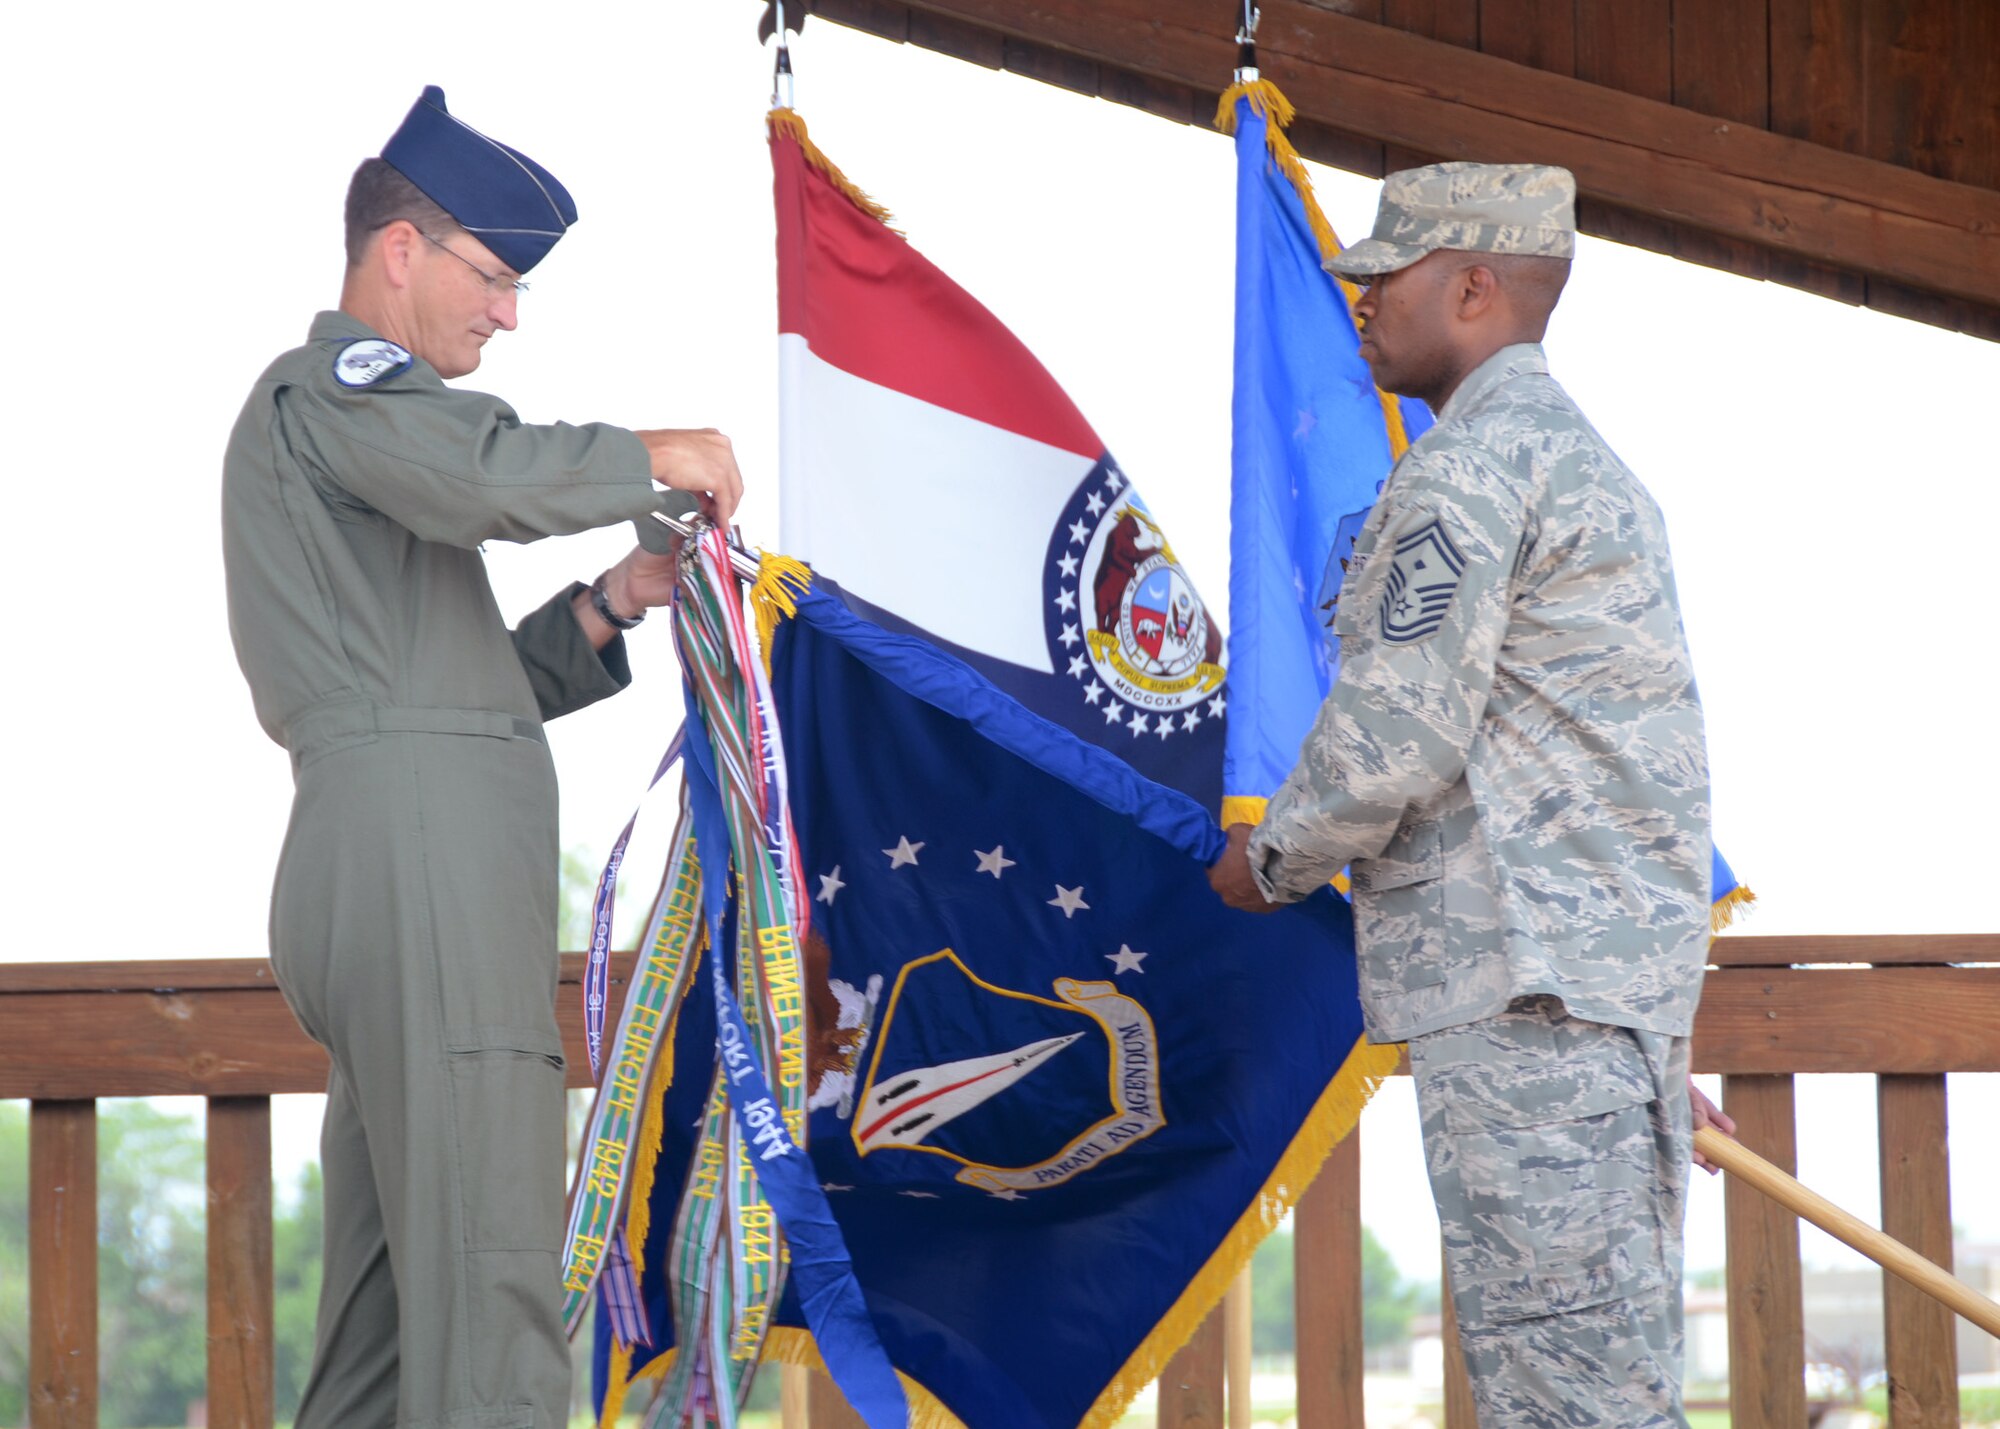 At the start of the131st Wingman Picnic culminating June 16-22, 2014, AT week activities, Col. Michael Francis, 131st Bomb Wing commander, with the assistance of Senior Master Sgt. Sheldon Matthews, added the 131st’s latest Air Force Outstanding Unit Award streamer – awarded in May – to the wing guidon, and thanked the wing’s members for a successful week and a strong start to the current calendar year. (U.S. Air National Guard photo by Staff Sgt. Brittany Cannon) 